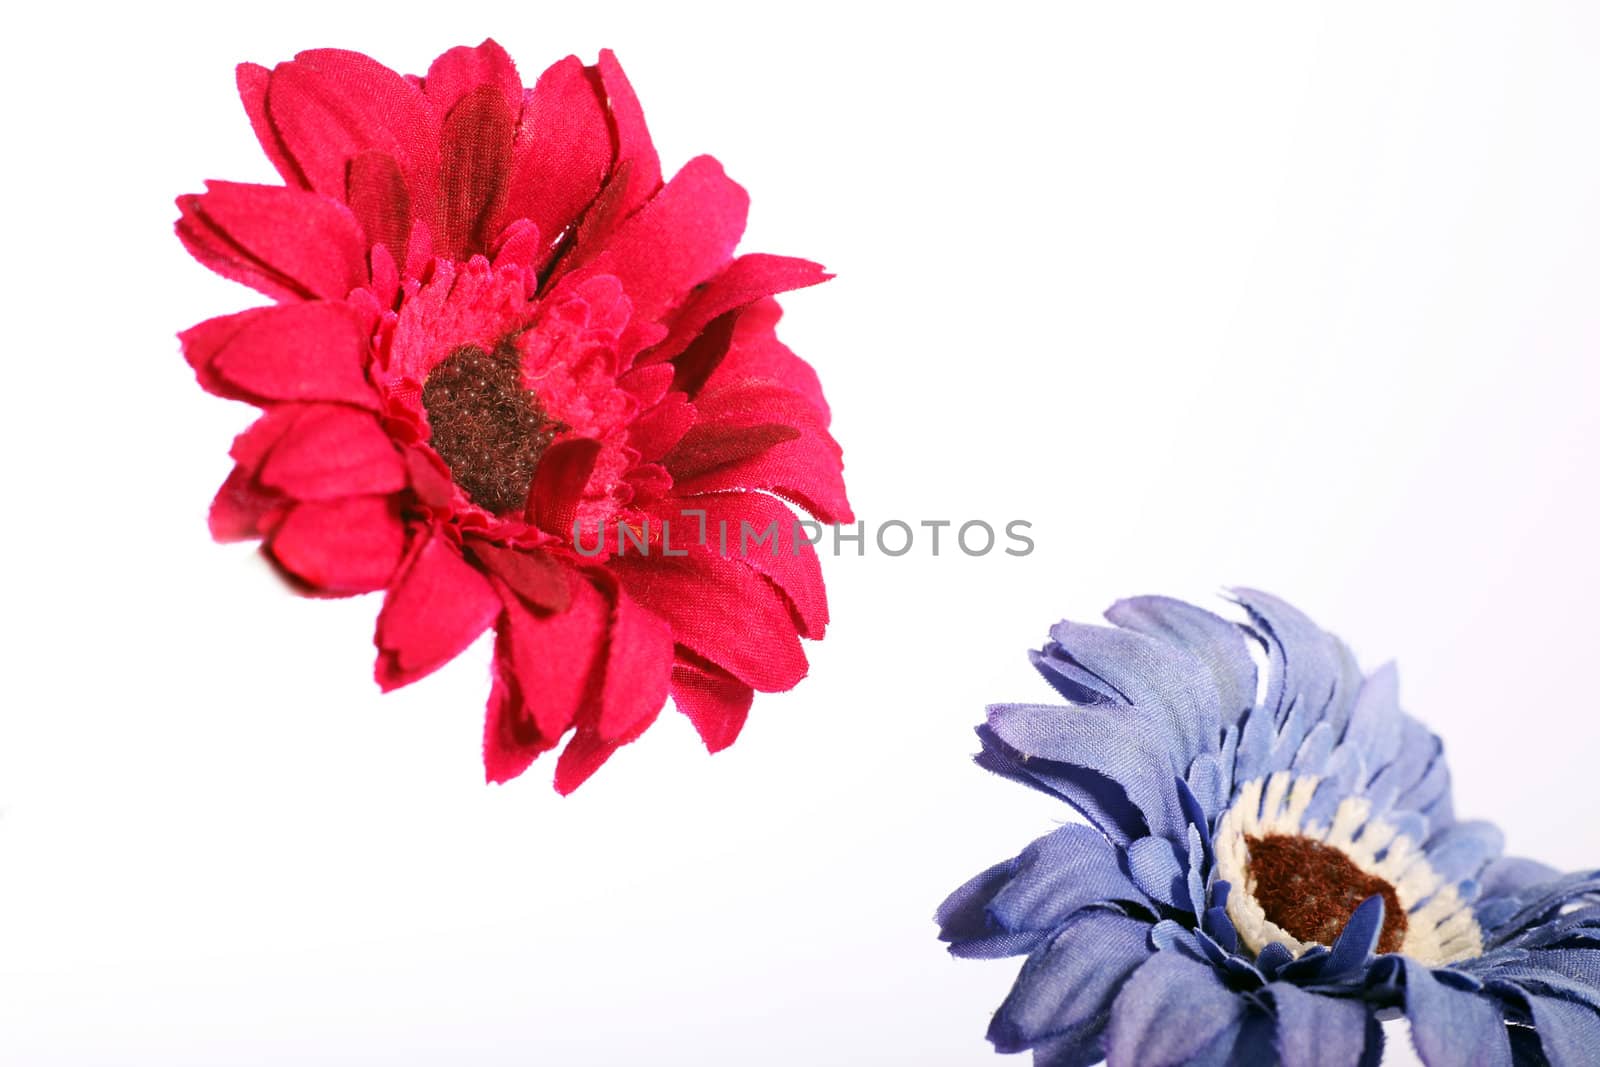 Red and purple daisy flower in a close up image